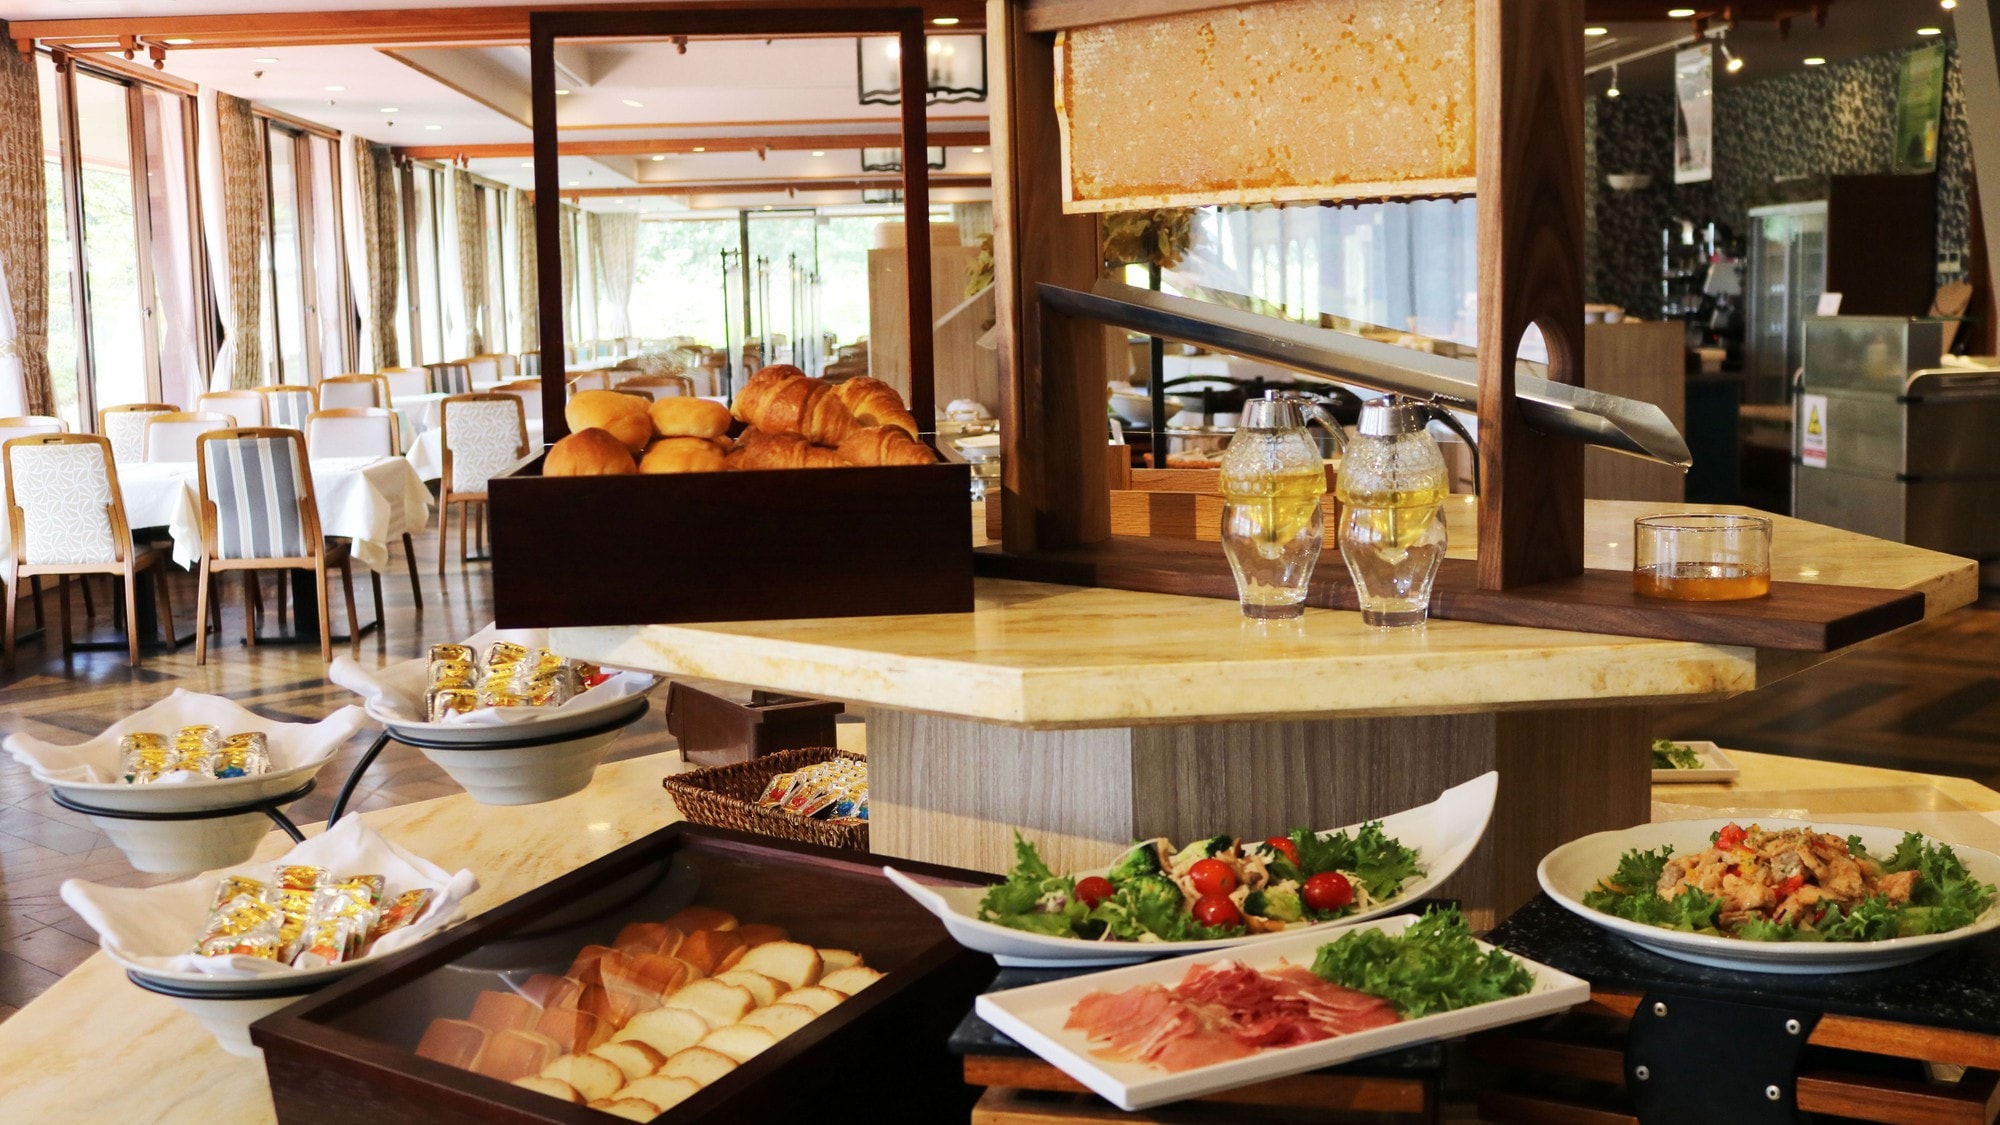 [Breakfast image] Buffet with a focus on nature and local produce based on the concept of living with the forest